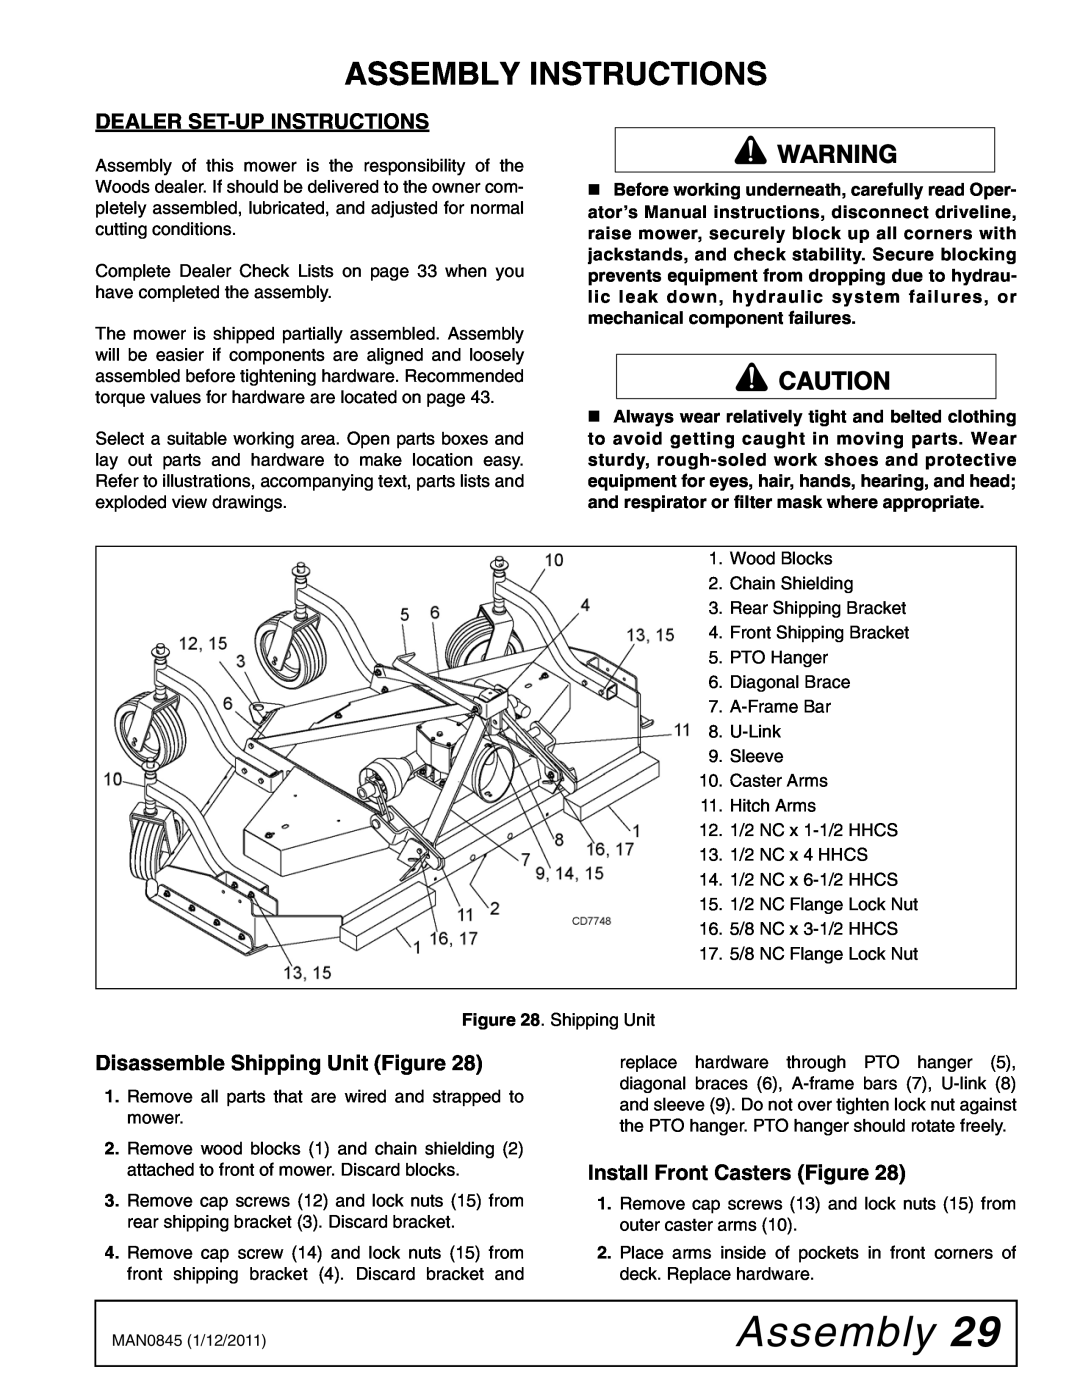 Woods Equipment RD990X manual Assembly Instructions, Dealer Set-Up Instructions, Disassemble Shipping Unit Figure 